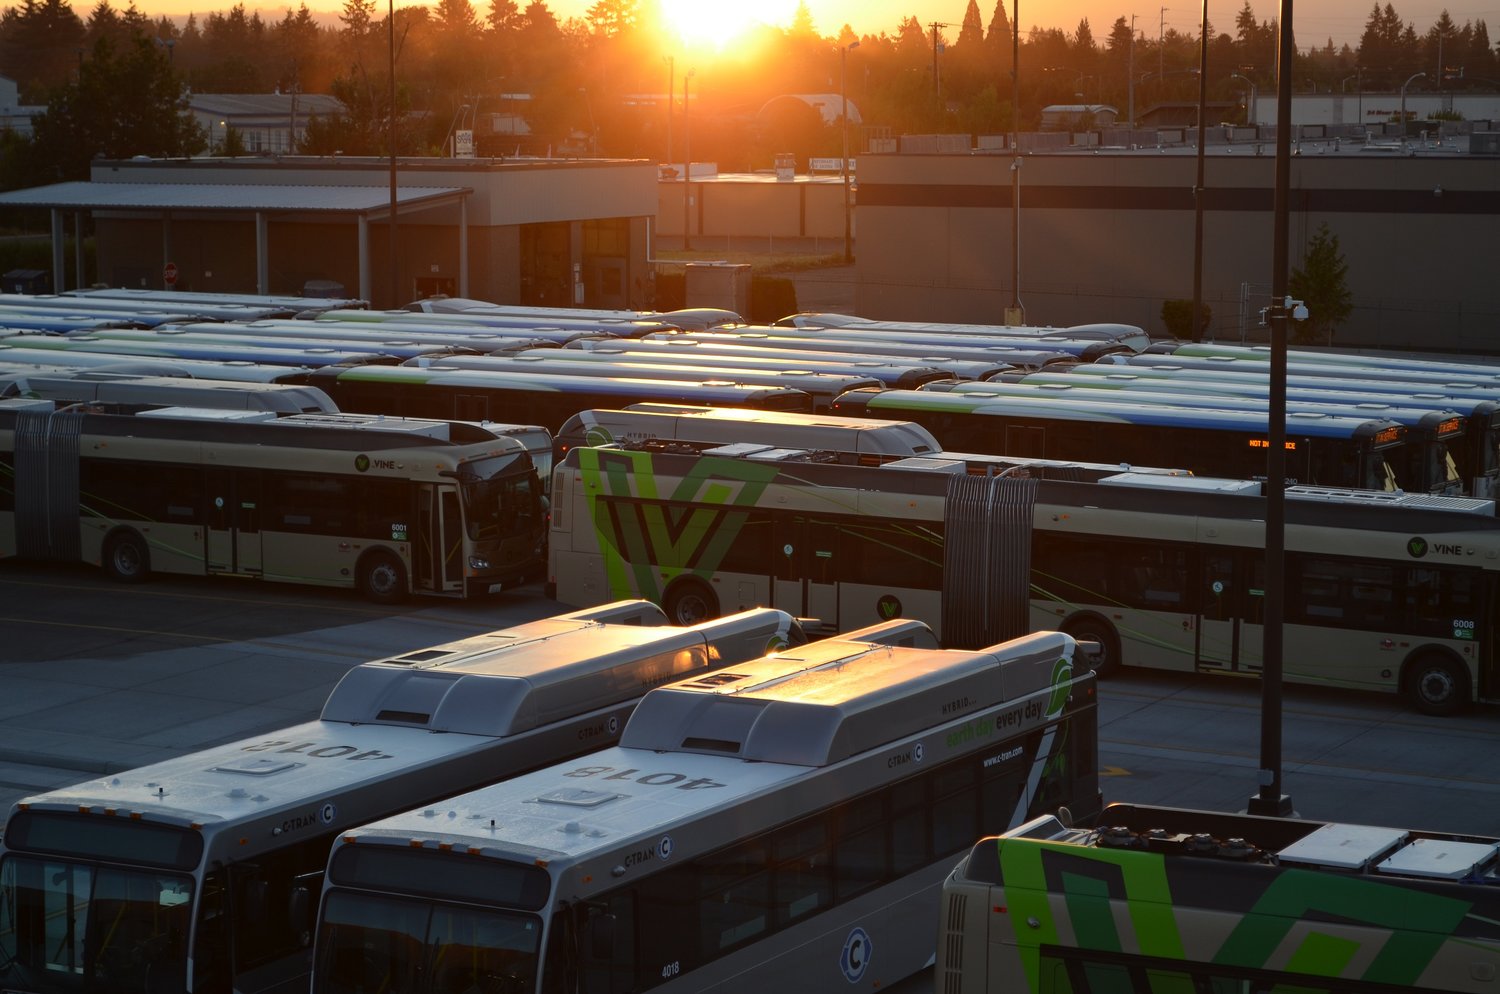 A fleet of C-TRAN buses, including the Vine and hybrid models, are pictured.